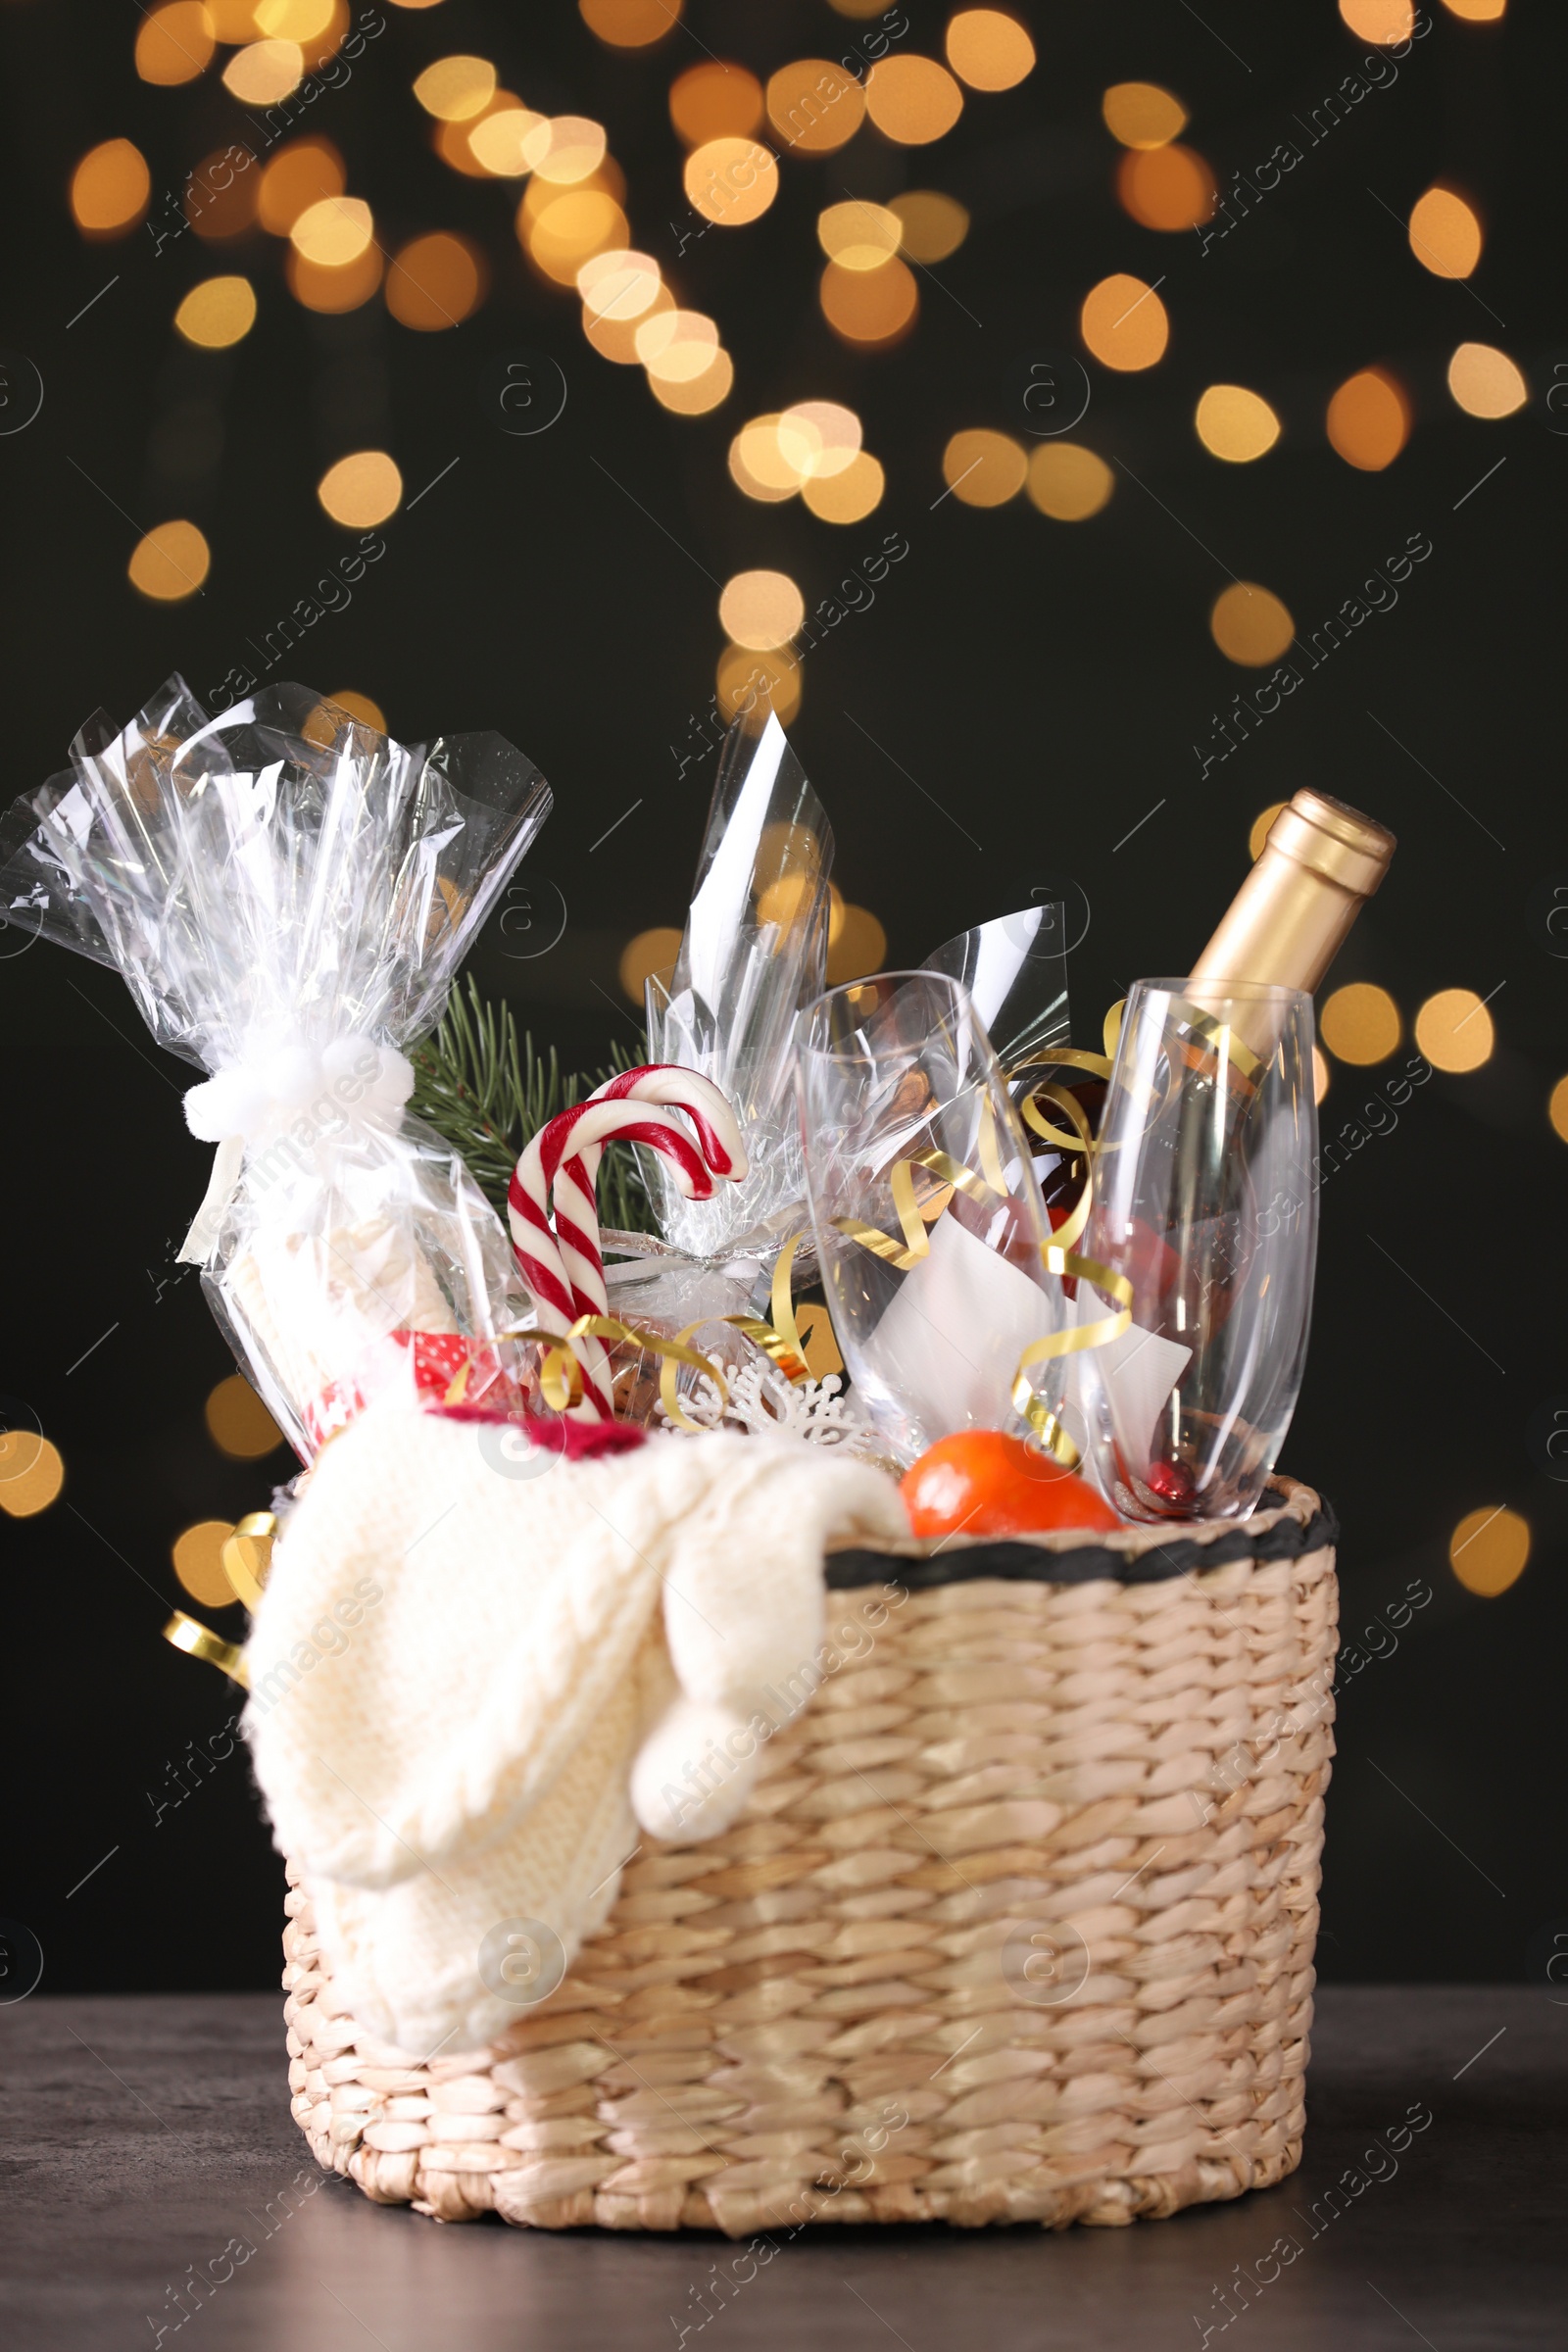 Photo of Wicker basket with Christmas gift set on grey table against festive lights